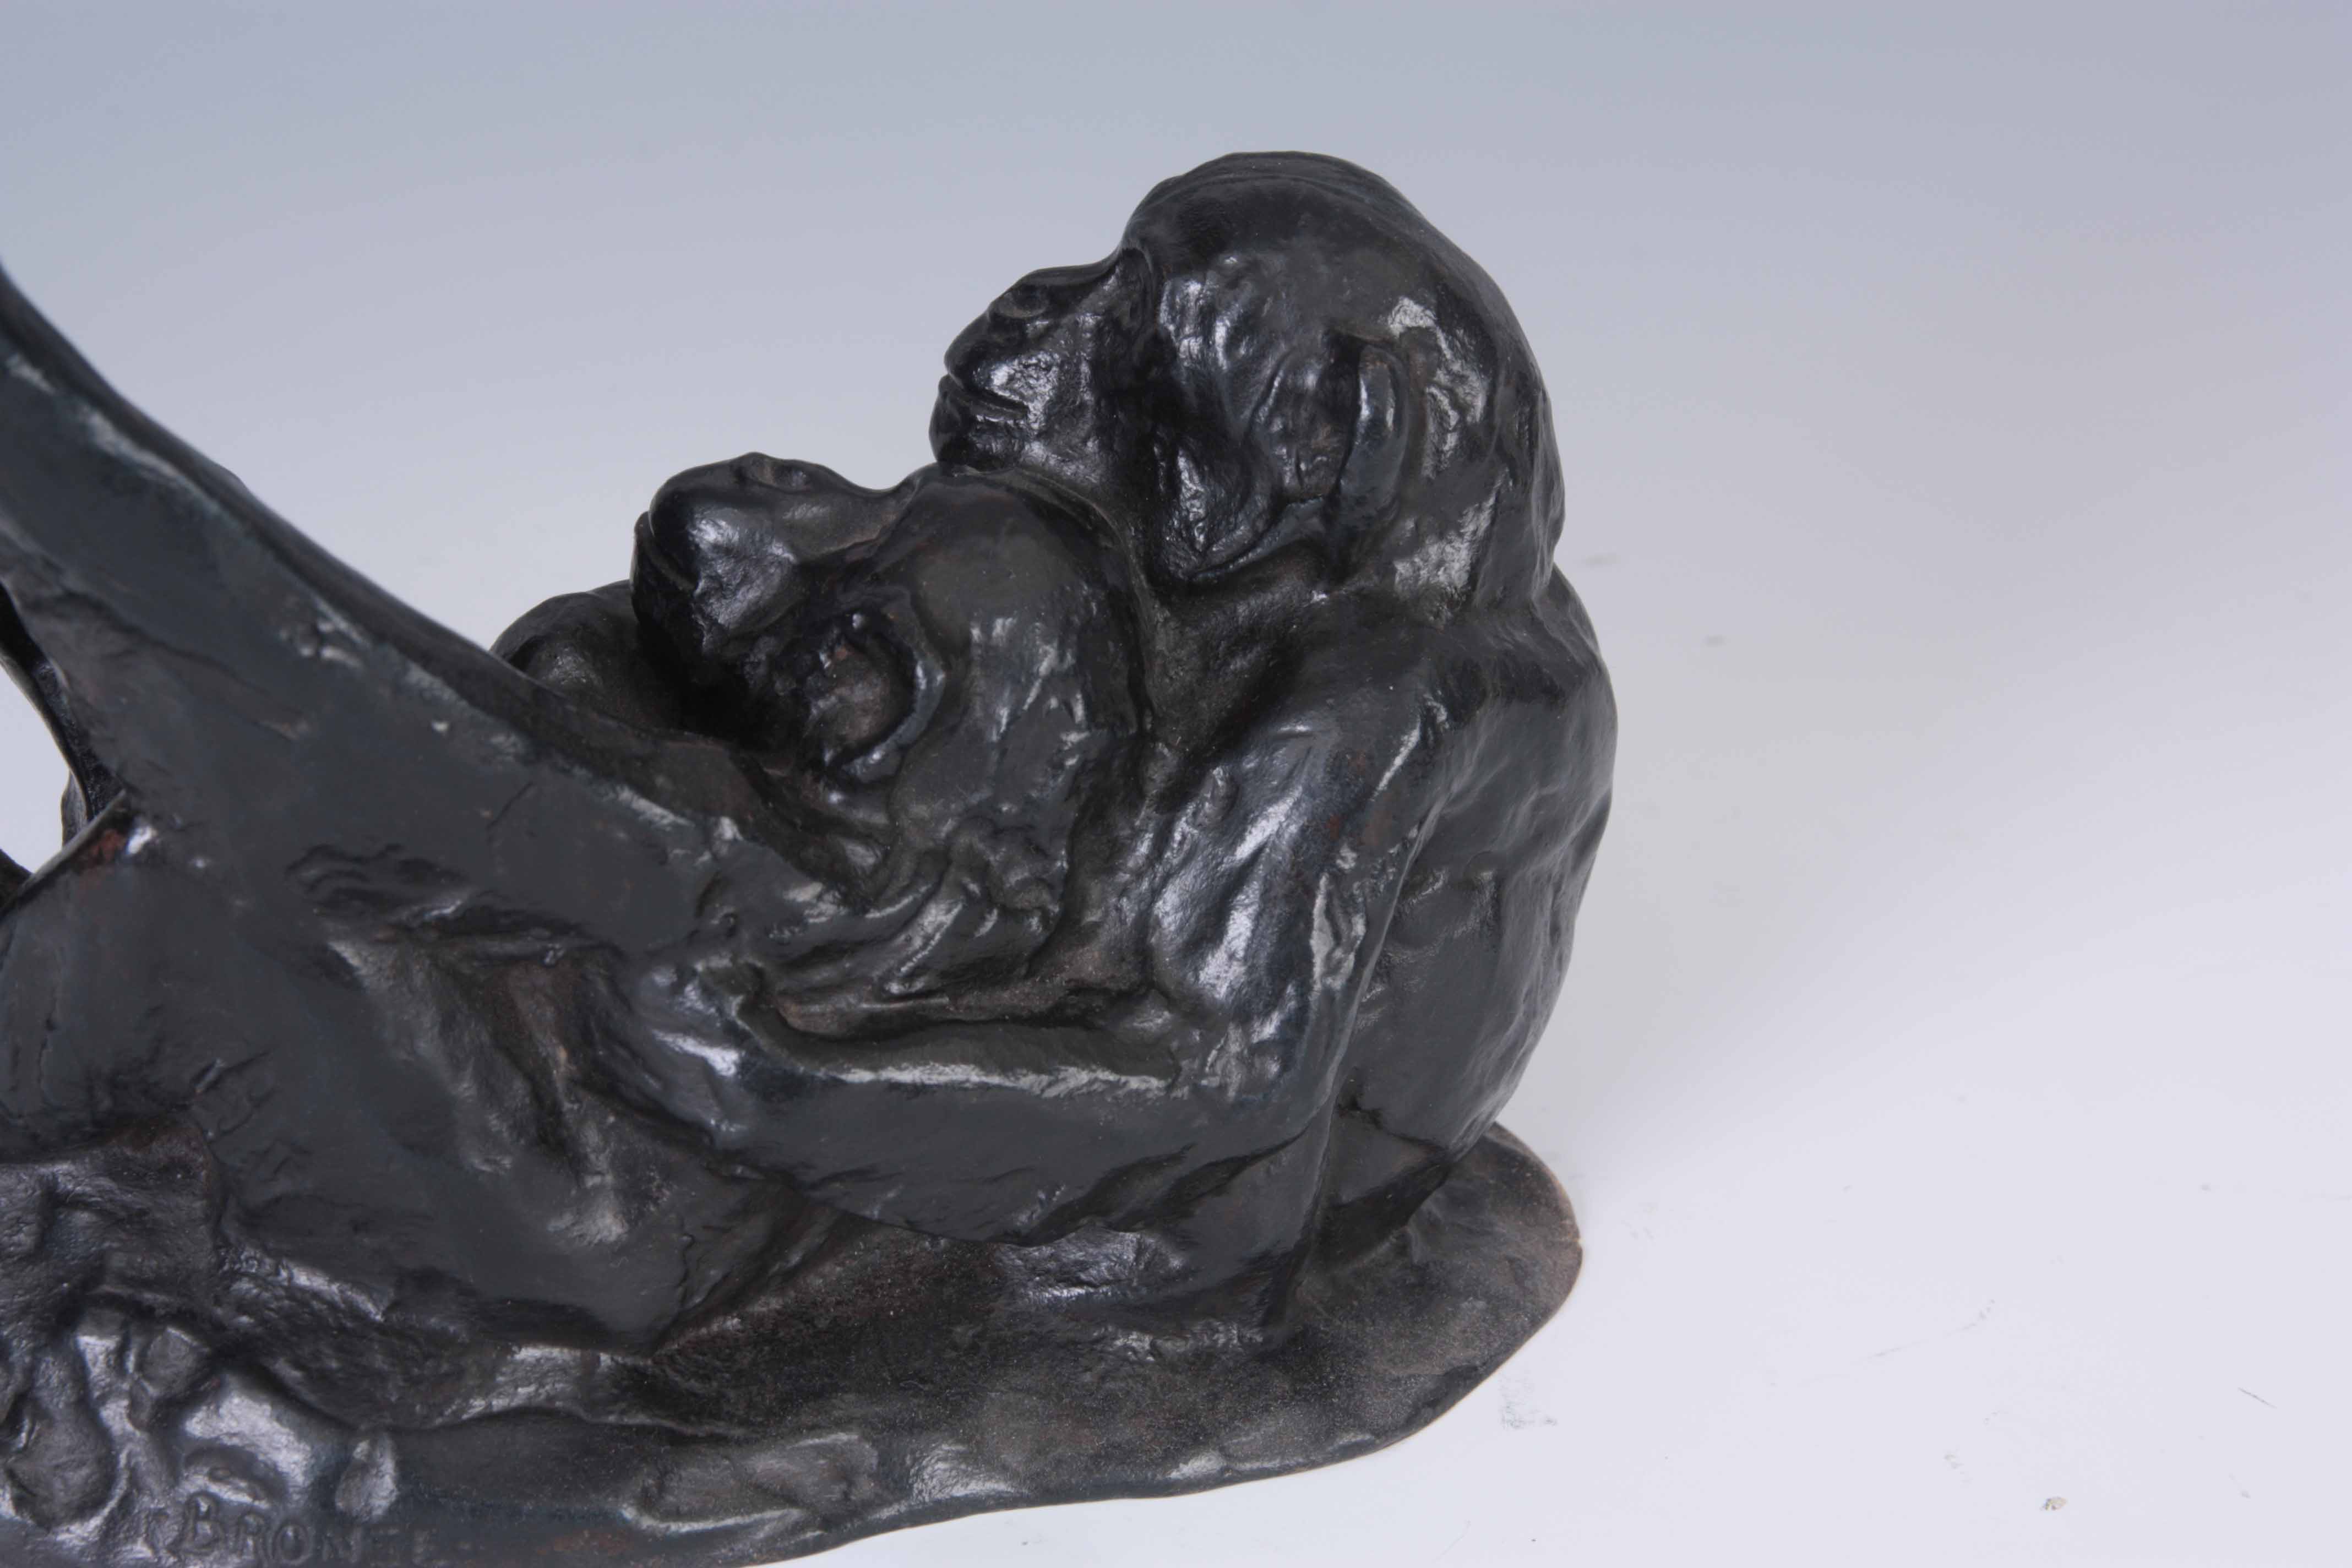 IRENEE RENE RICHARD. A 1930's FRENCH PATINATED BRONZE SCULPTURE modelled as two playful monkeys - Image 8 of 9